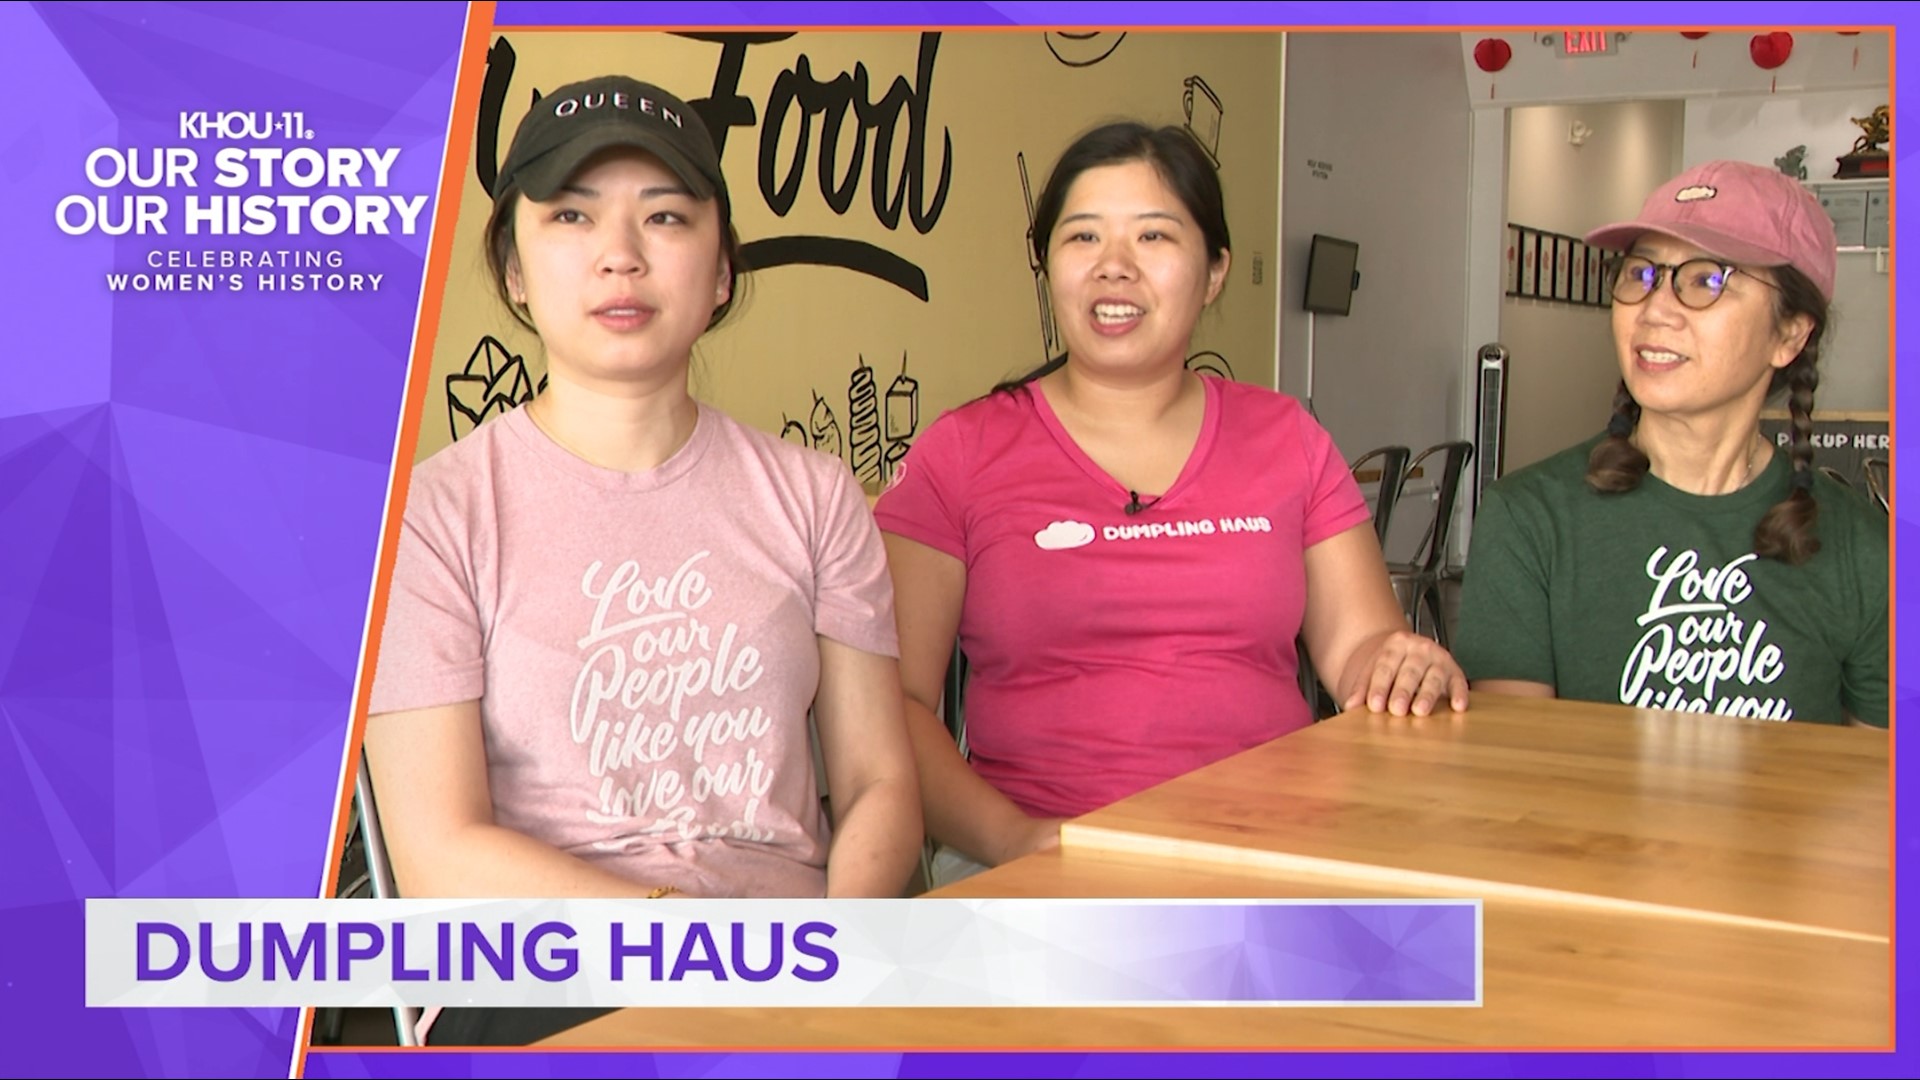 The dumplings at Dumpling Haus may be so tasty because there is love in the kitchen. The family-owned business is located in Sawyer Yards in Houston.